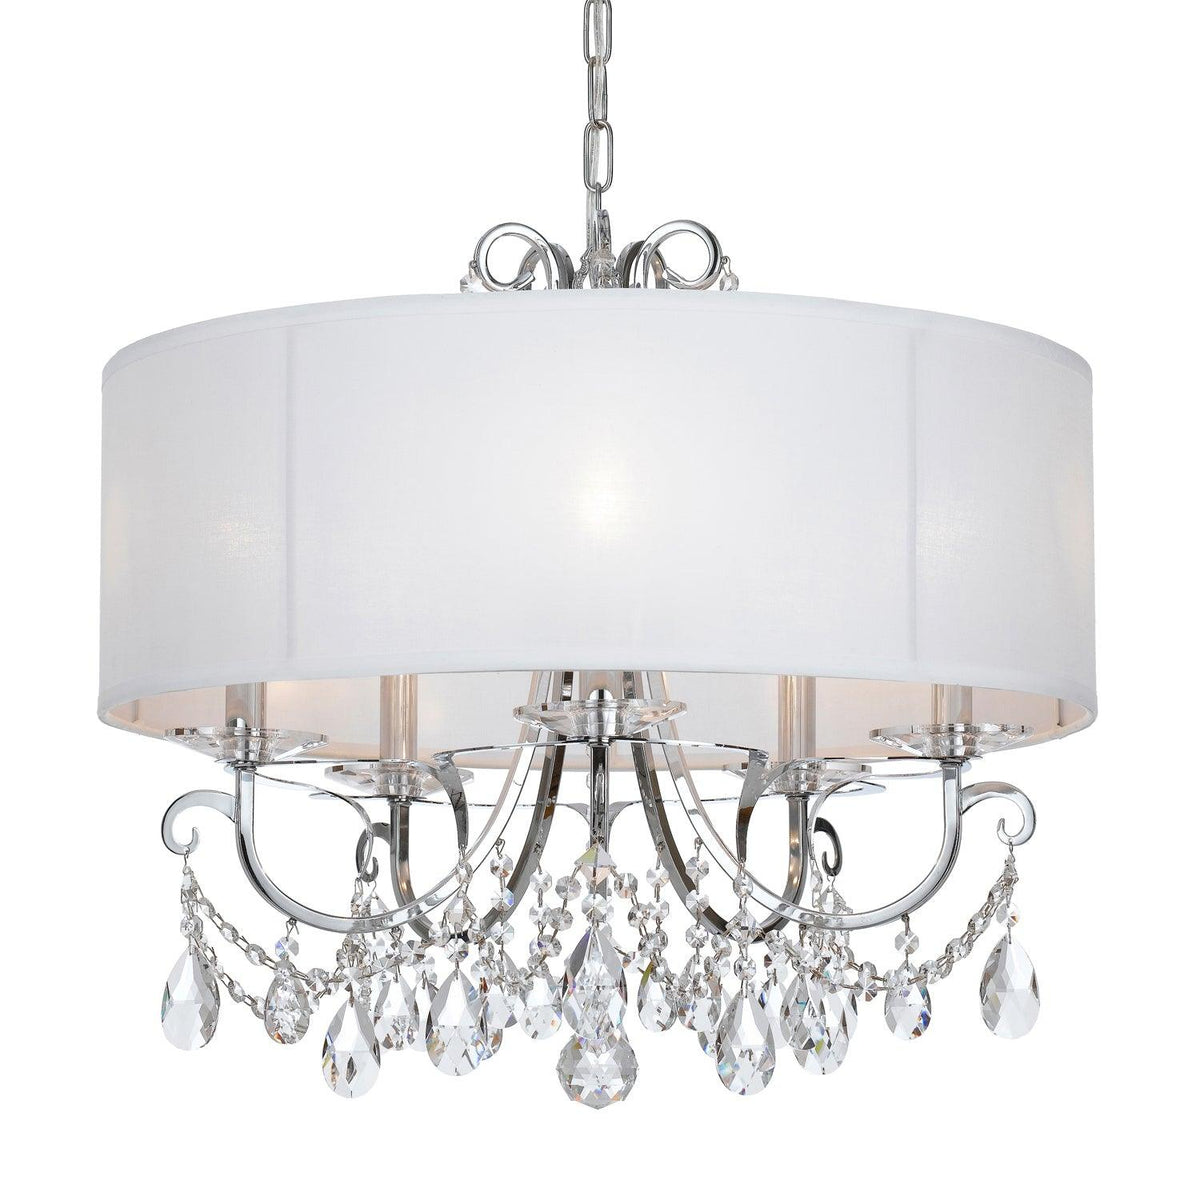 Crystorama - Othello Drum Shade Chandelier - 6625-CH-CL-S | Montreal Lighting & Hardware